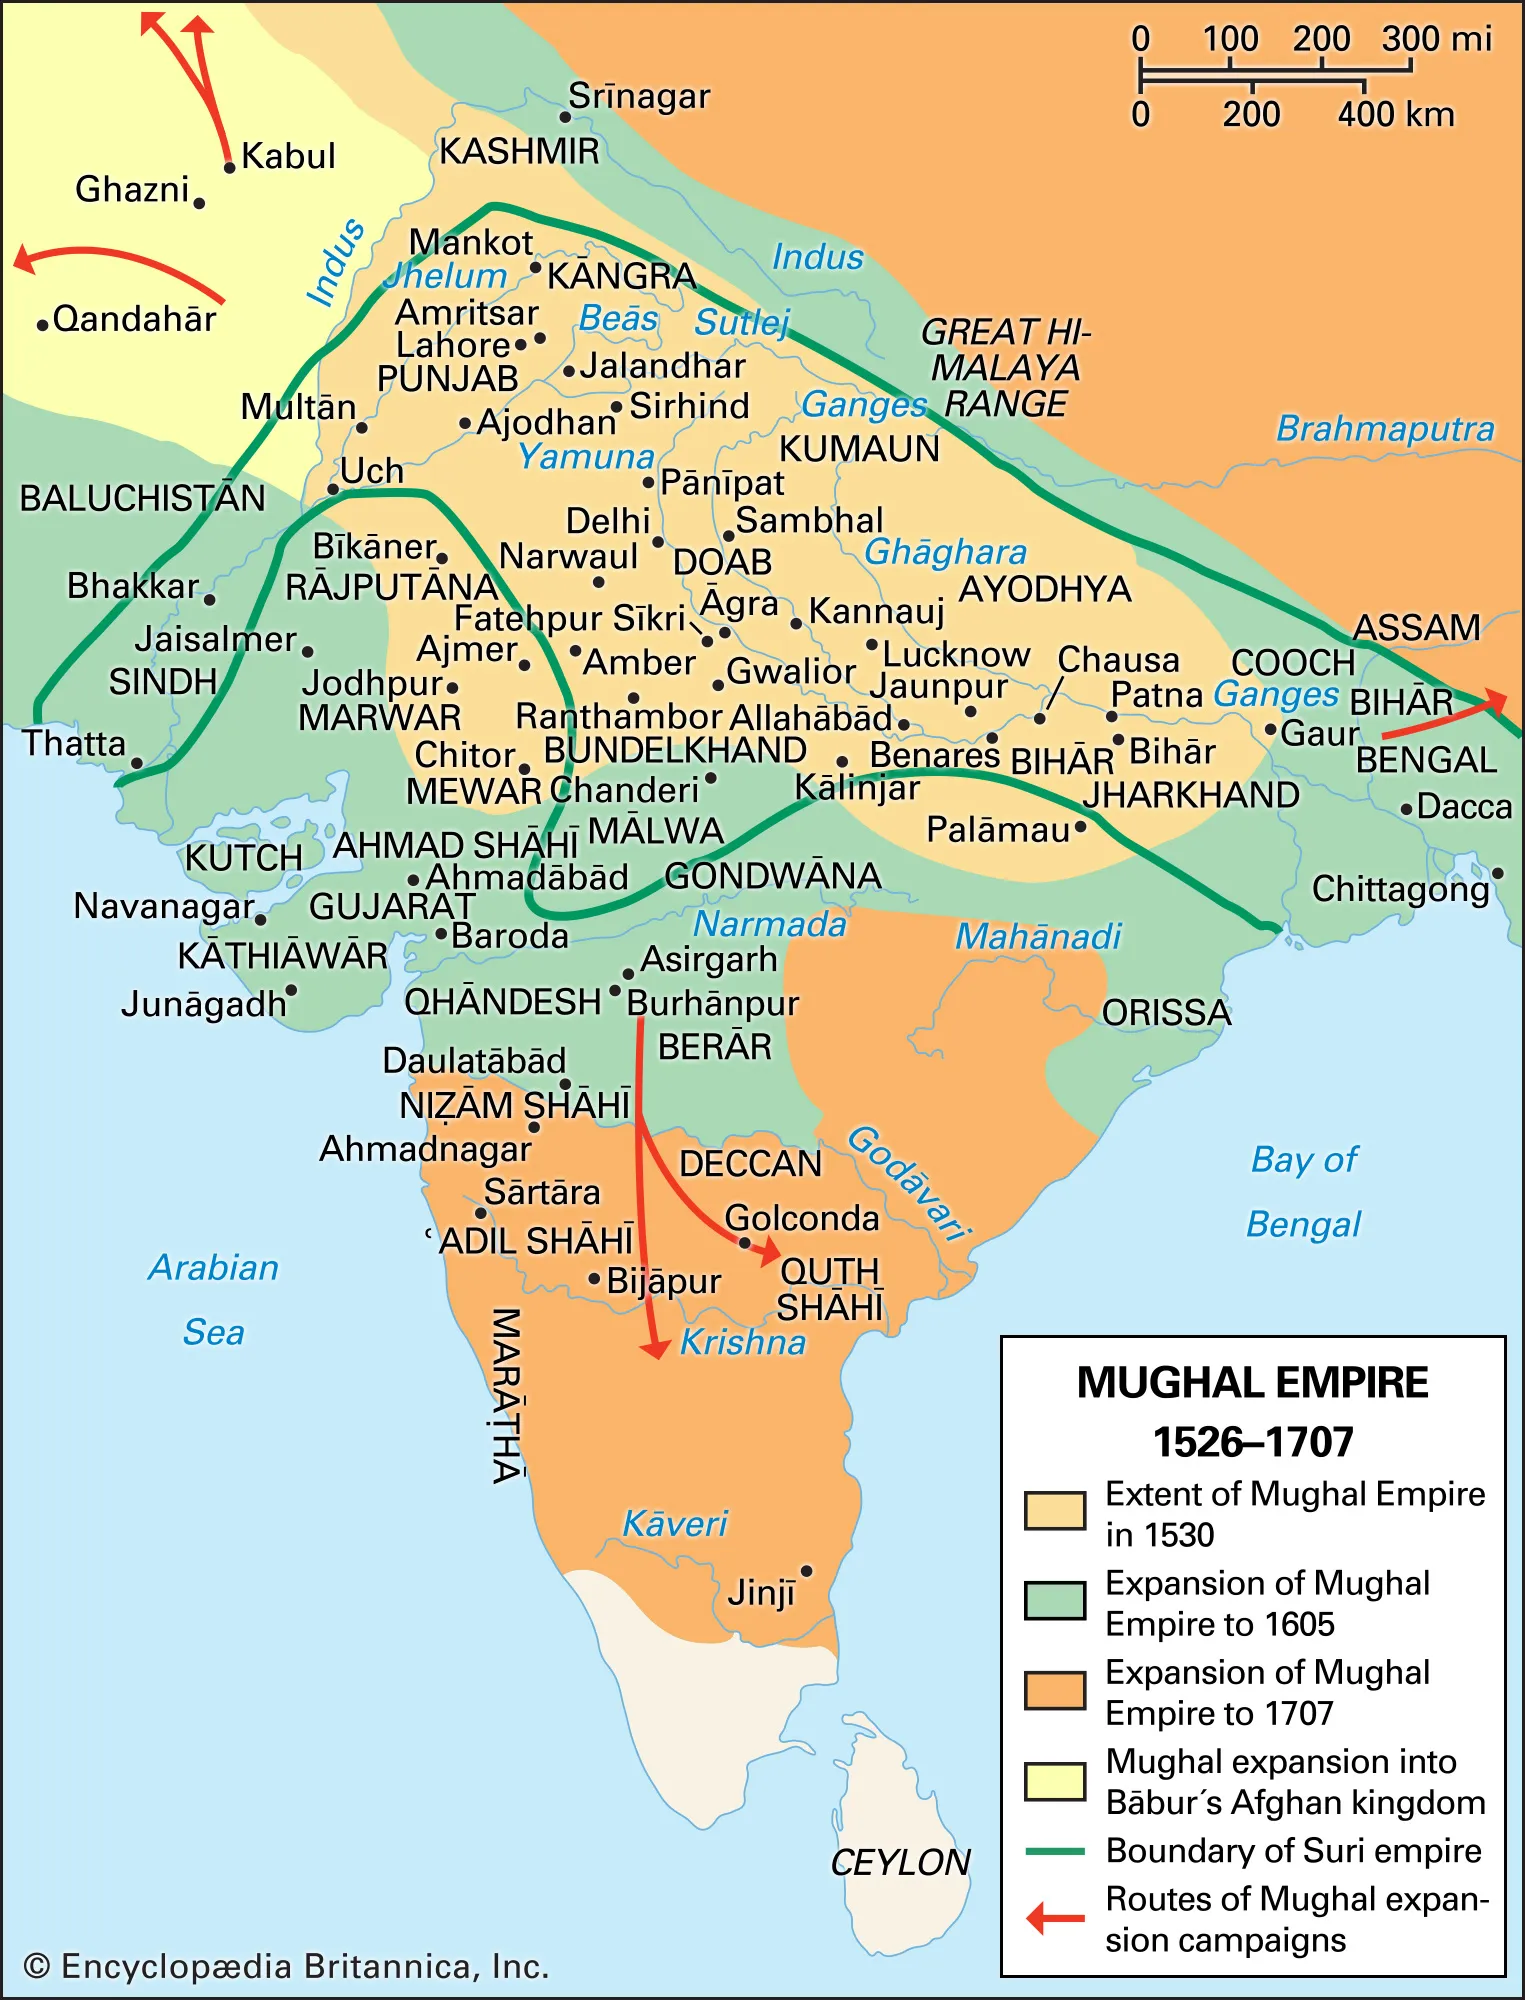 <p>________- Muslim Dynasty who ruled over a majority Hindu population.</p>